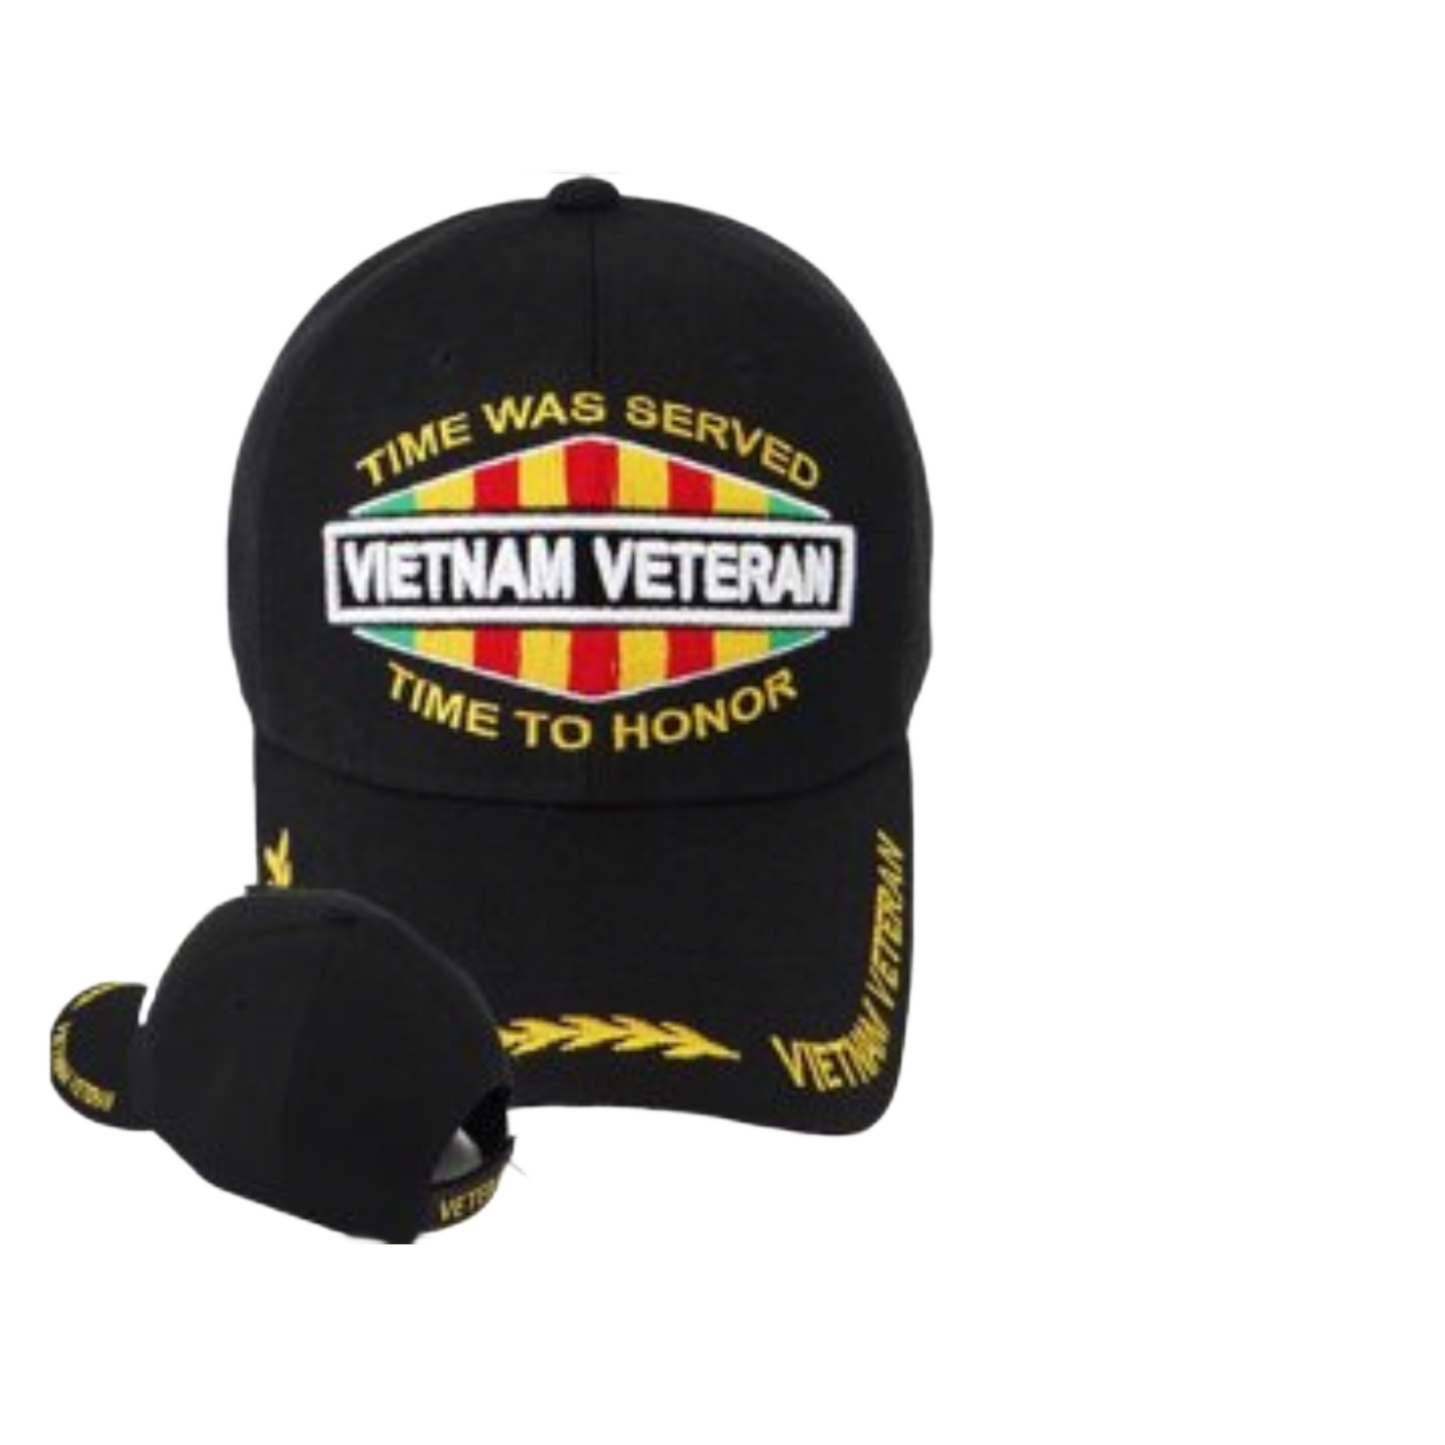 VIETNAM TIME TO HONOR